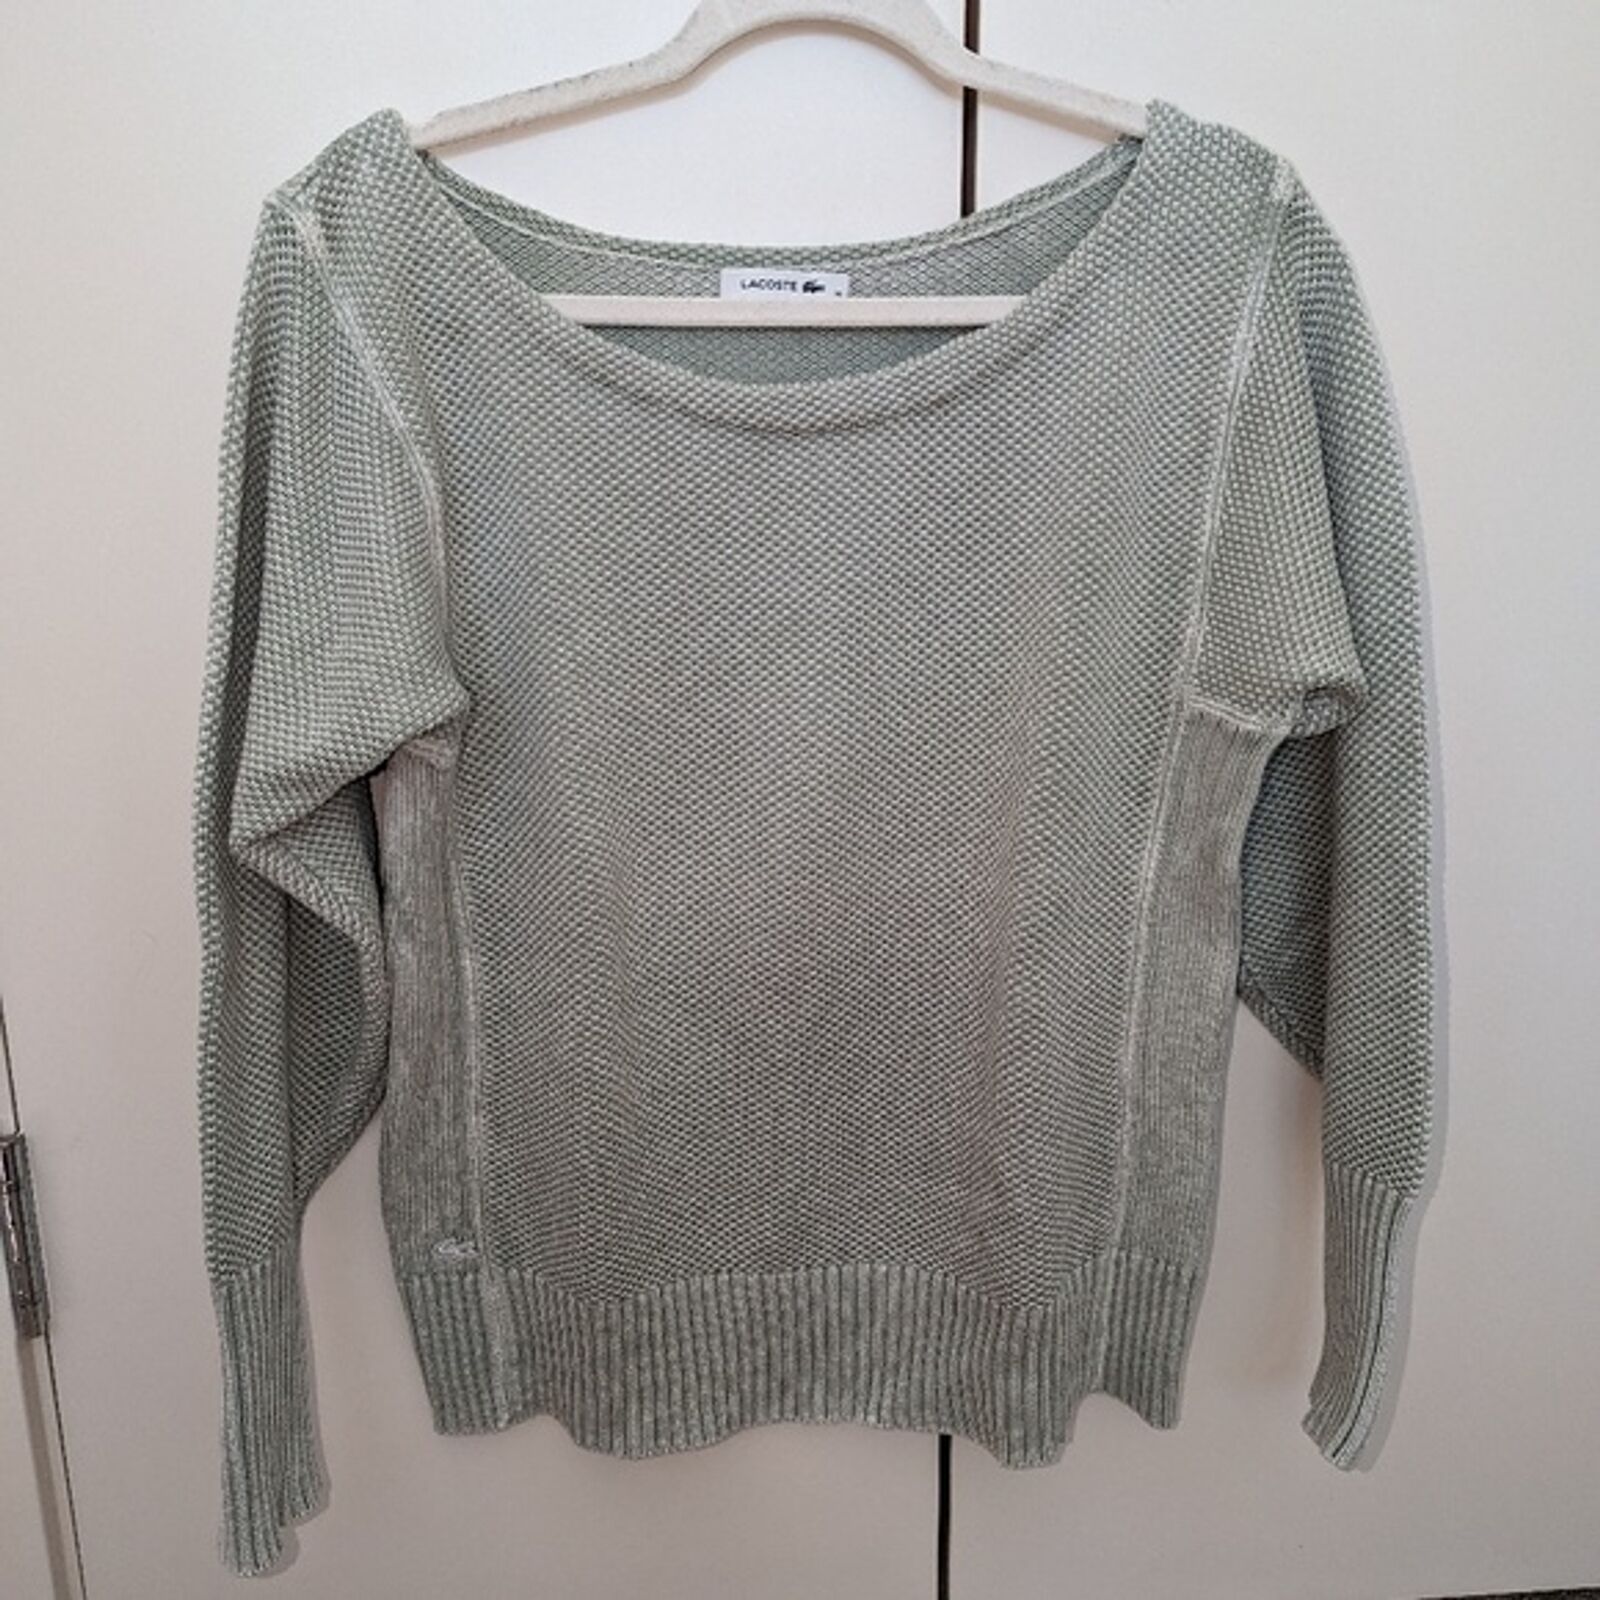 Lacoste pale green knit sweater - image 3